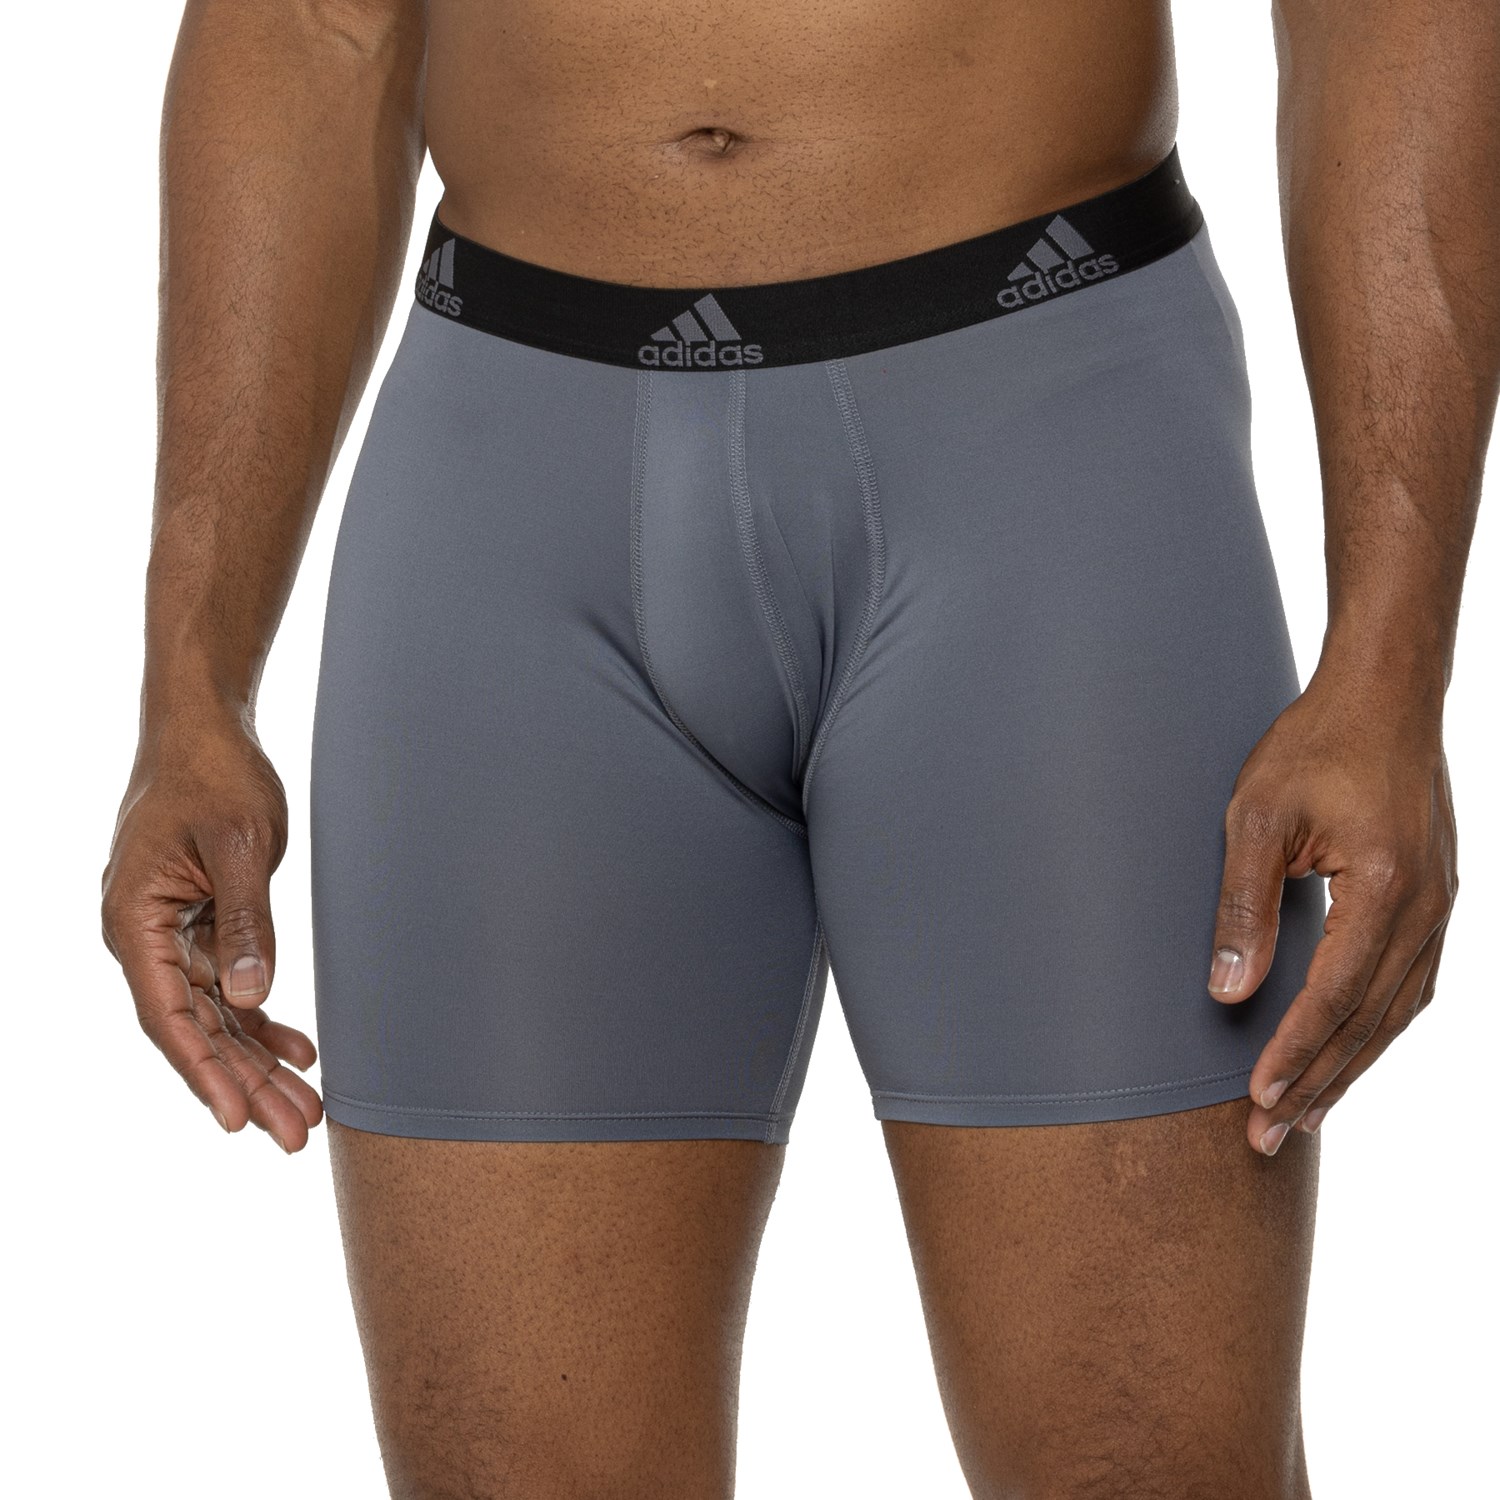 adidas Core-Performance Boxer Briefs - 3-Pack - Save 46%